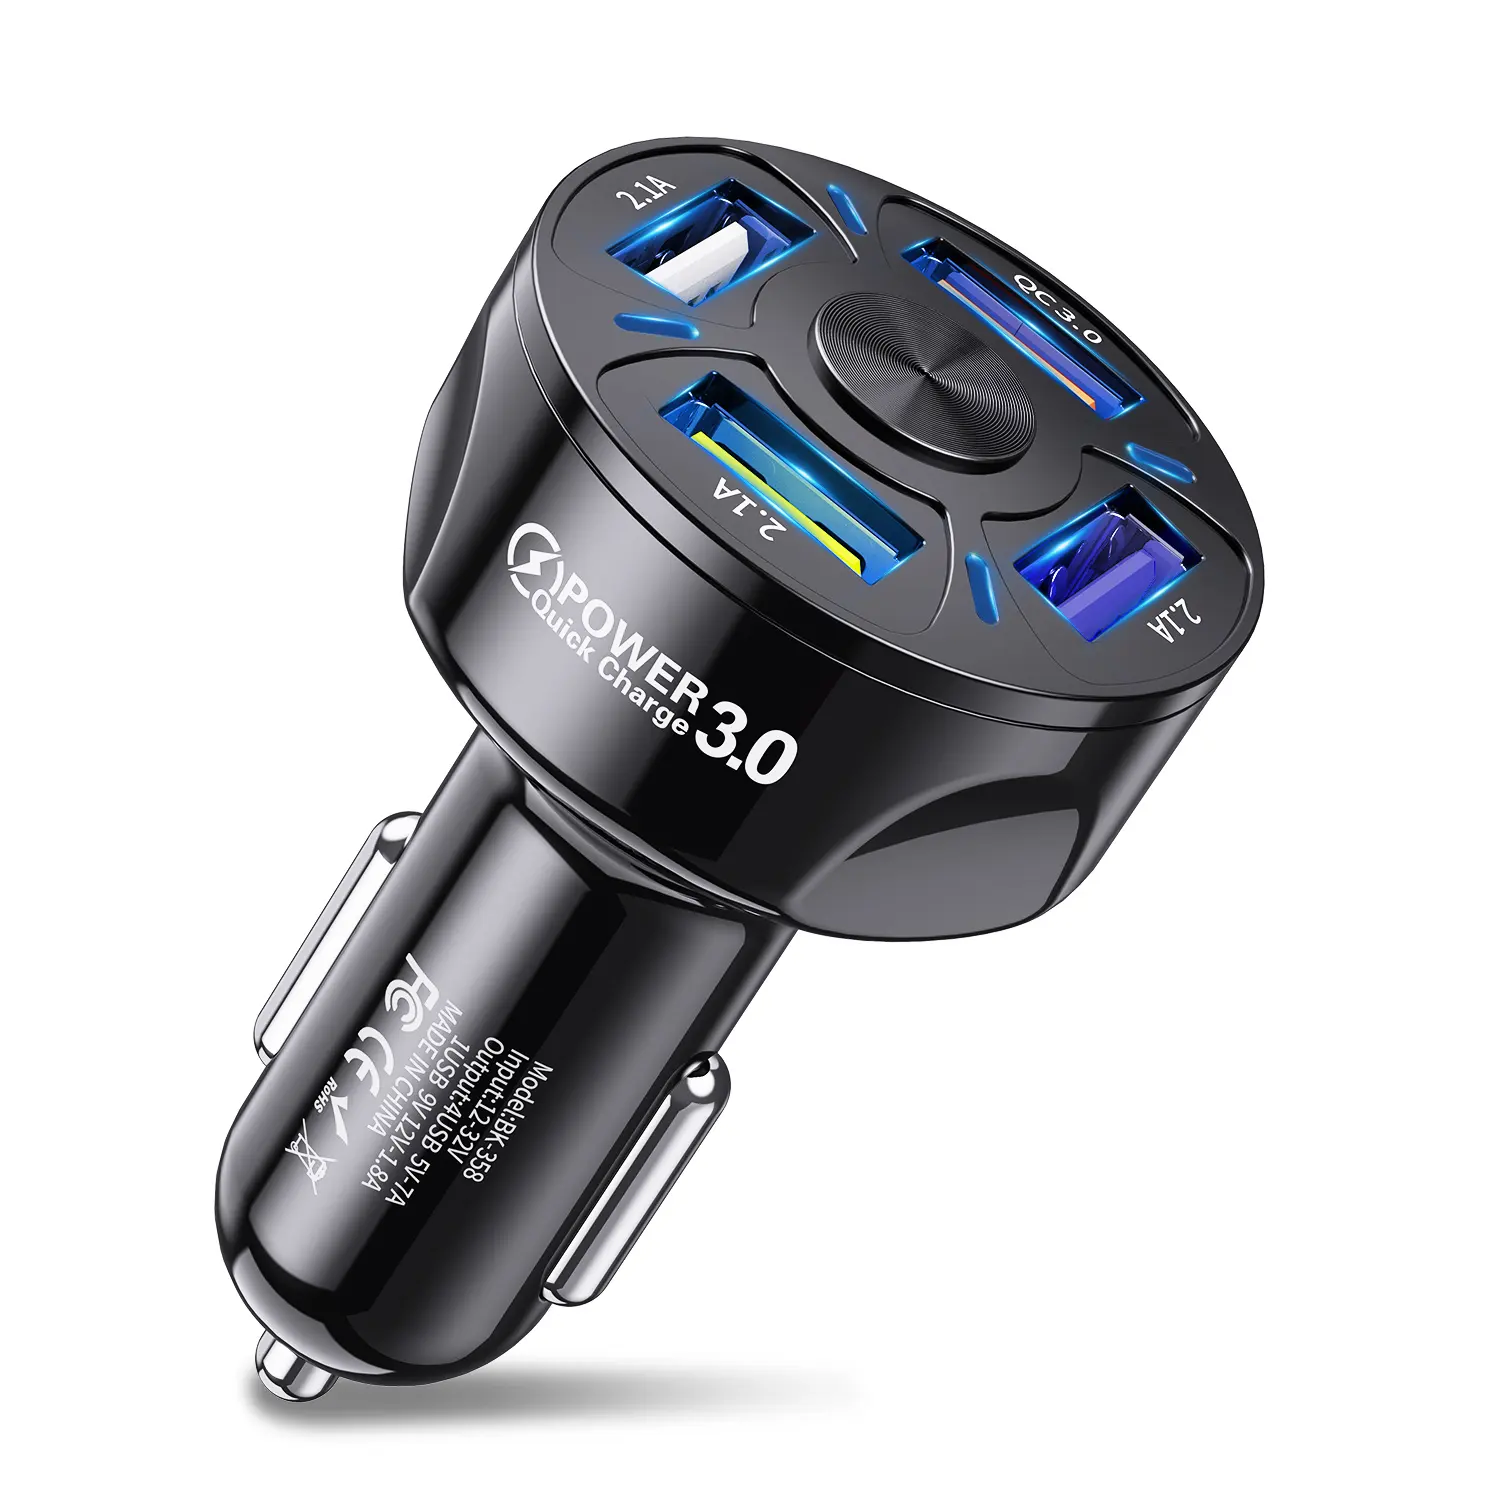 Car USB Charger 6A 48W 4 port Quick Charge 3.0 Universal Fast Charging For iphone 11 Pro Samsung a31 Car Cigarette Adapter